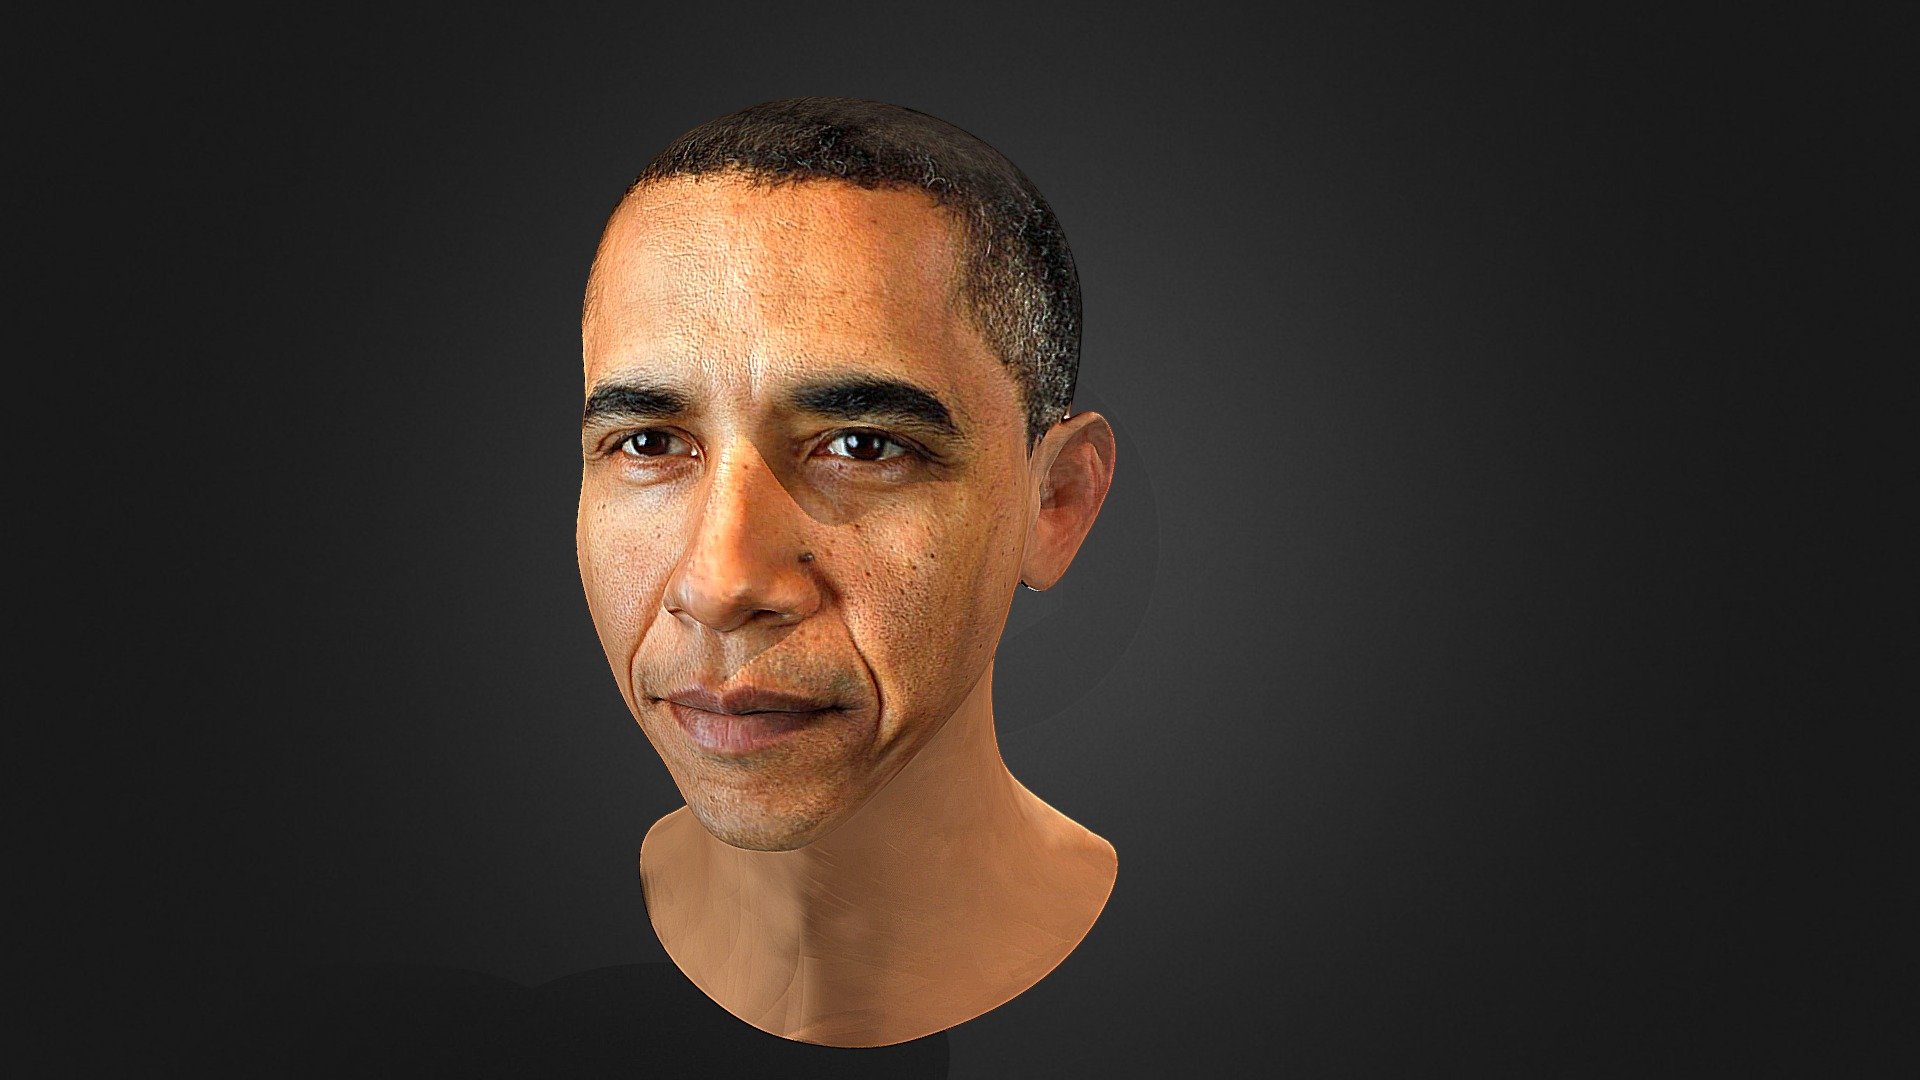 Source format-blend

Uploaded Size-5M

Download size-4MB

Geometry-Triangles 2
                   Quads 18k
                  Total triangles 36k

Vertices -     18k

Textures-1

Materials-1

UV Layers-Yes

Barack Obama is a former president of the United States, who served from 2009 to 2017. He is also the first African-American president in the history of the country. He was born in Hawaii to a Kenyan father and an American mother. He graduated from Columbia University and Harvard Law School, where he was the president of the Harvard Law Review. He was a senator from Illinois before becoming the president. 3d model